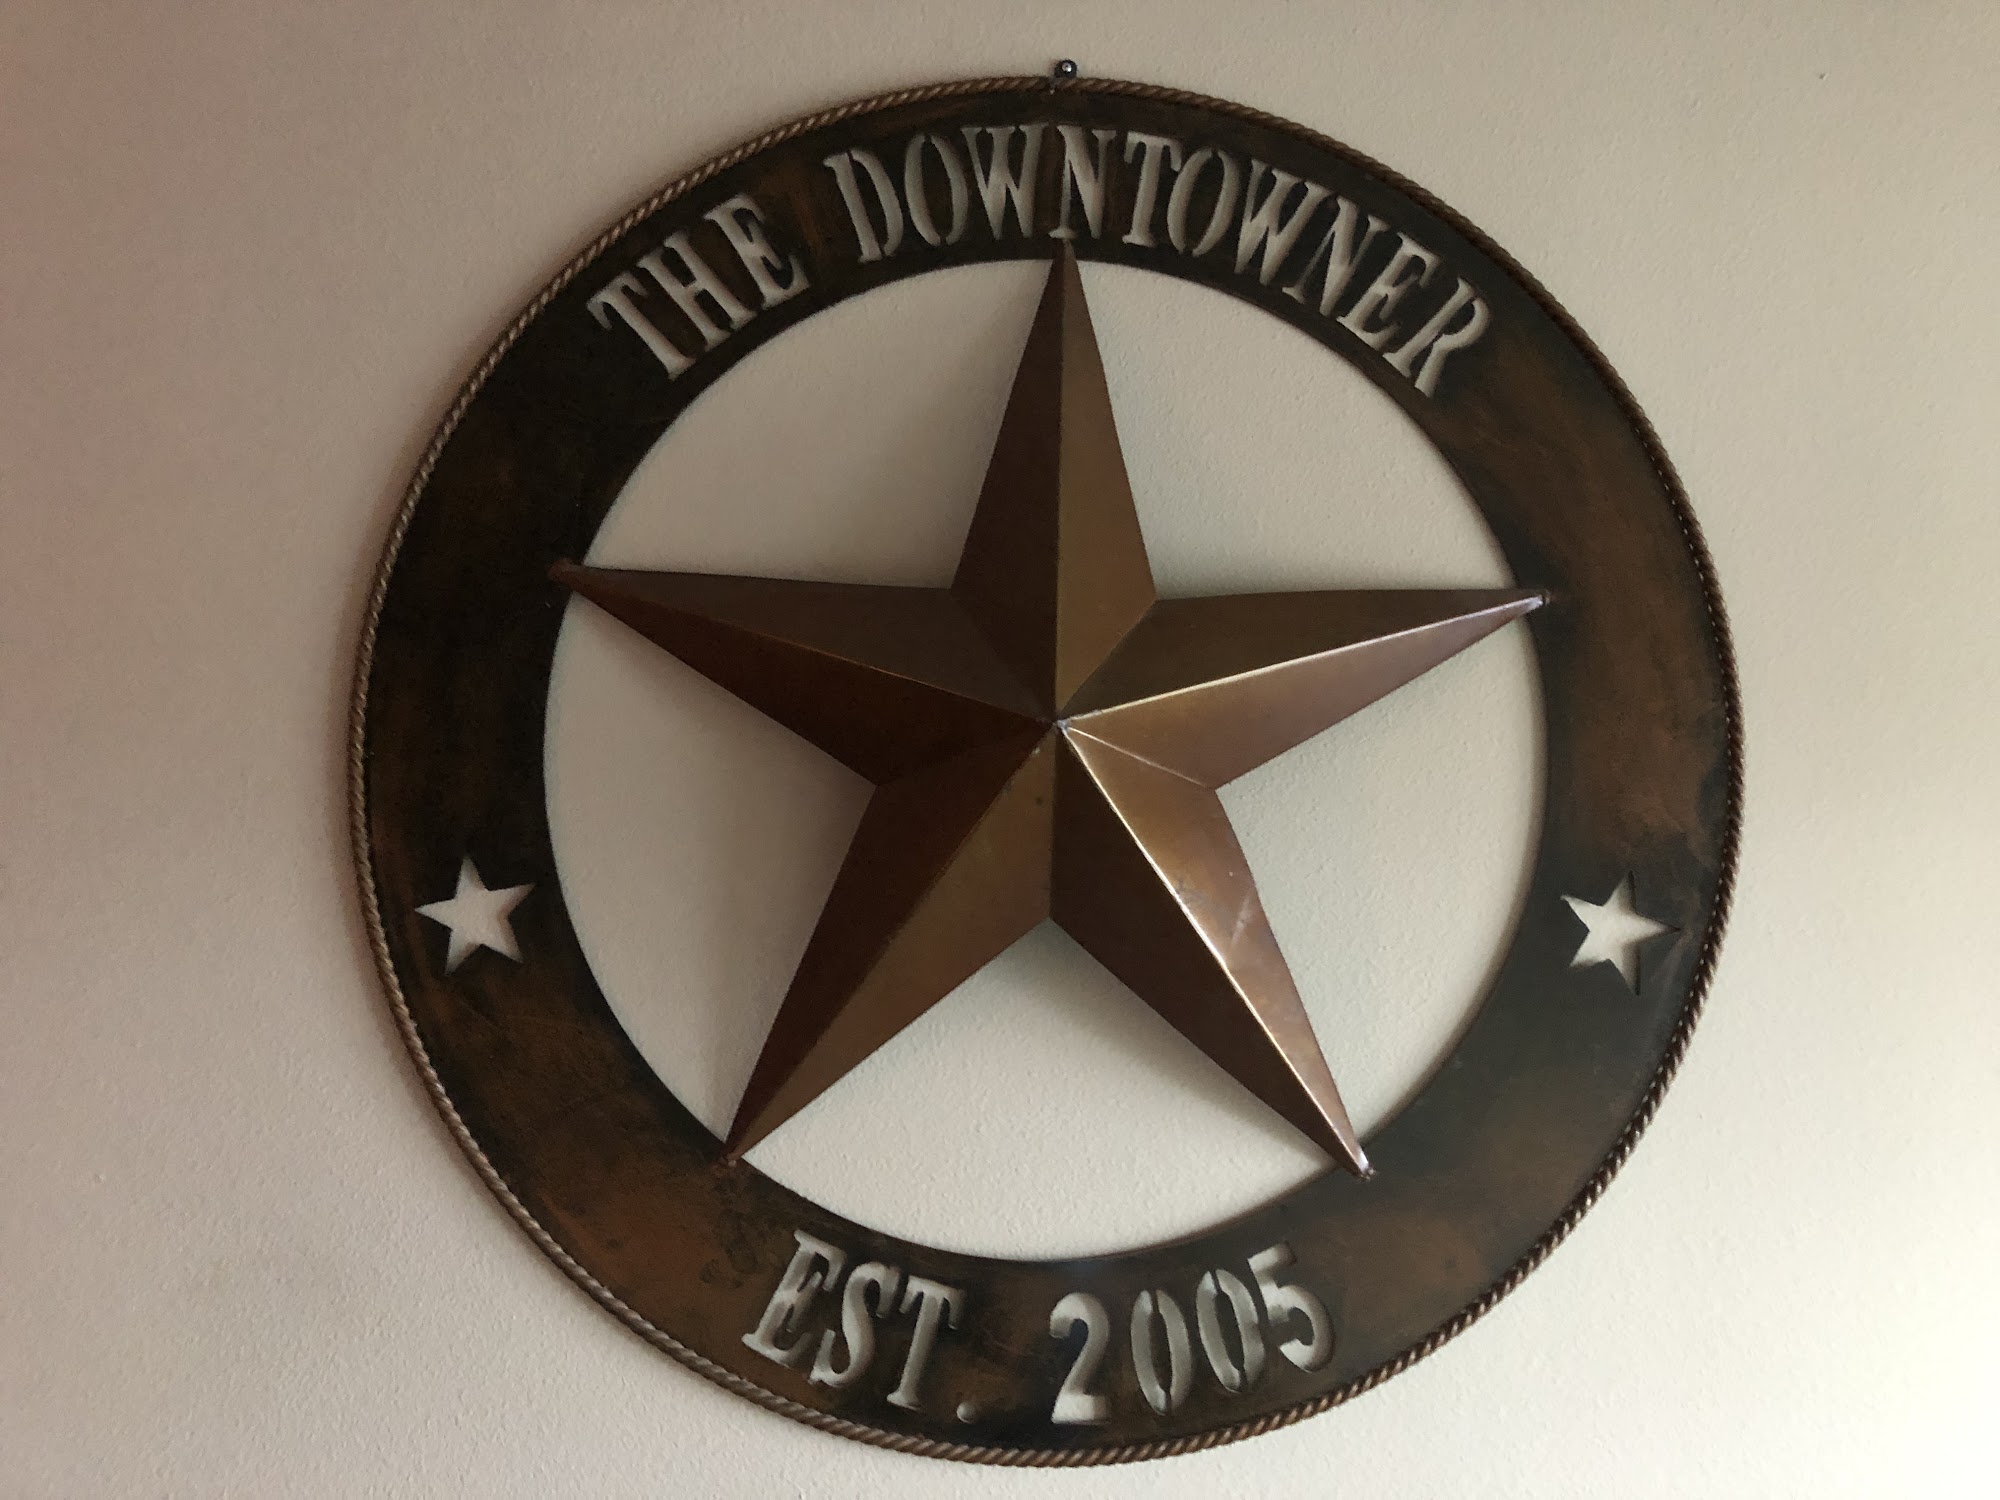 The Downtowner Suites